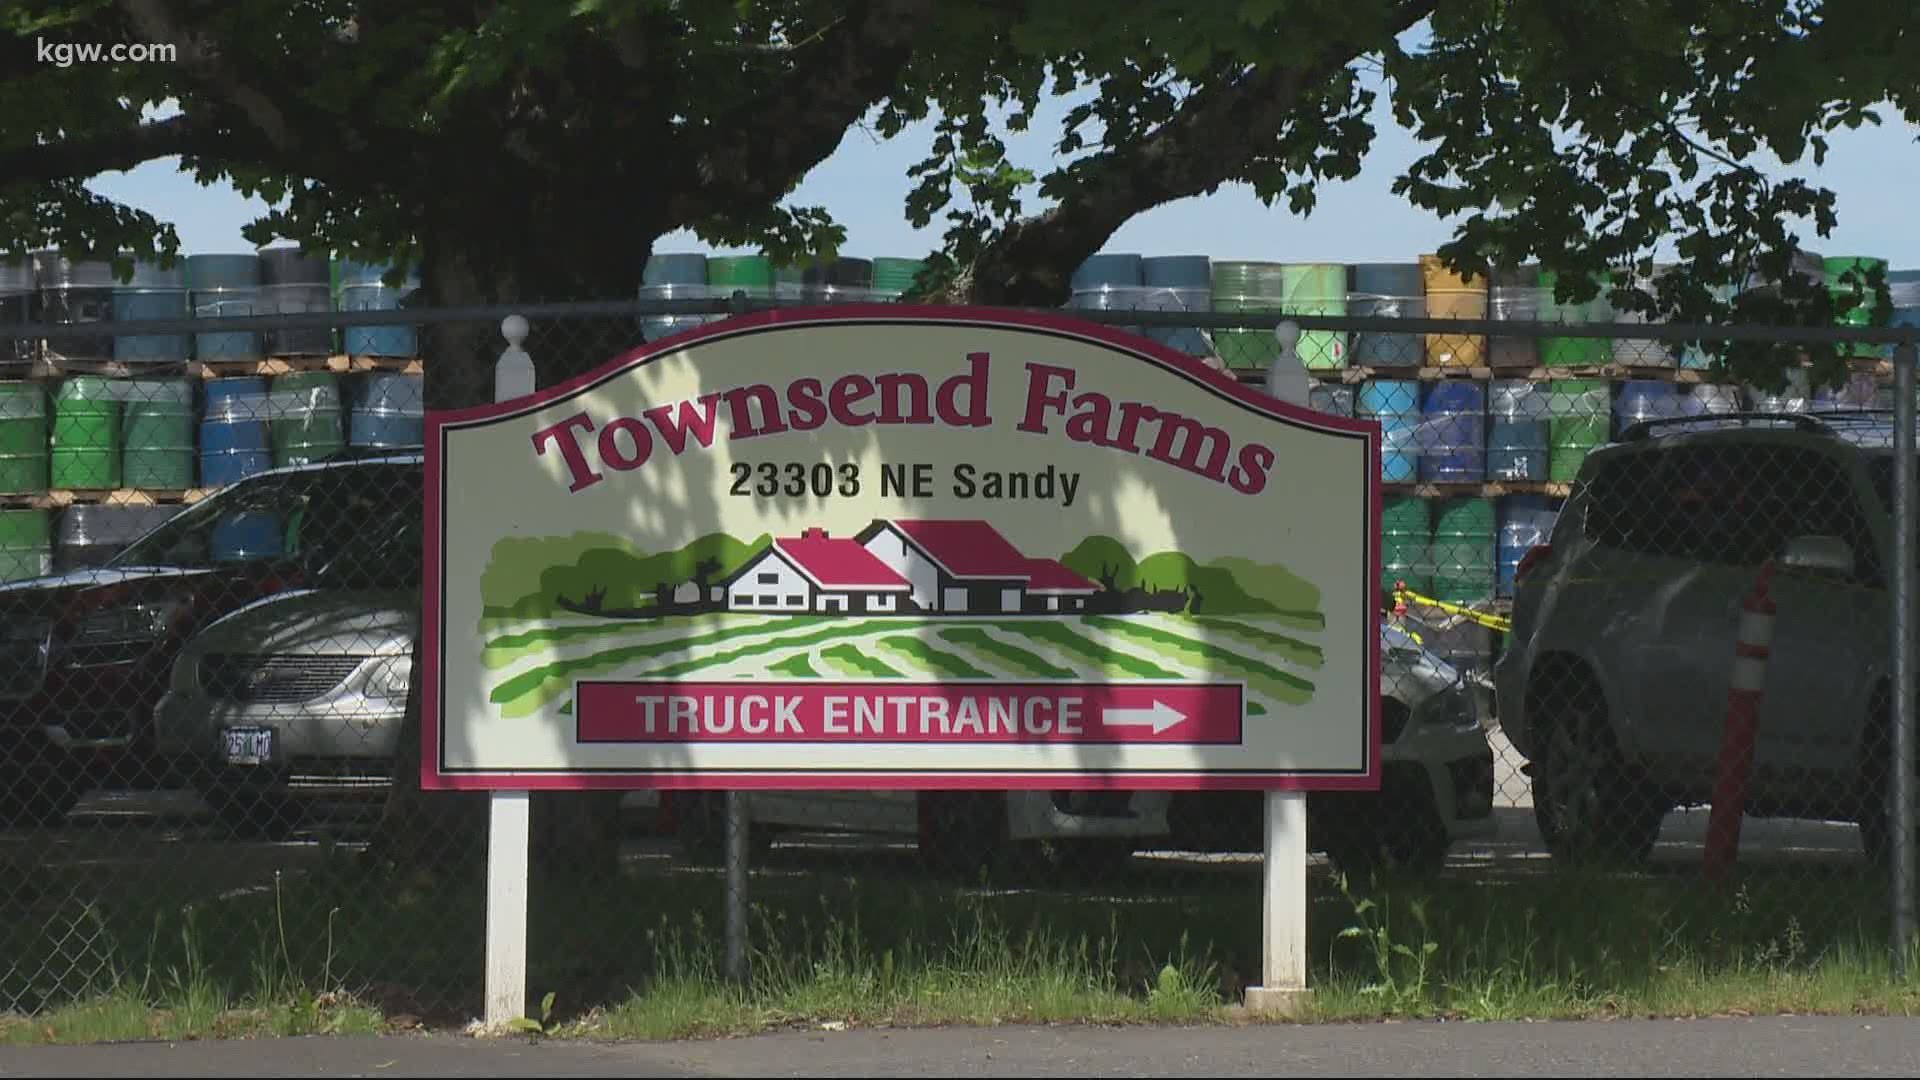 After 48 farmworkers tested positive for COVID-19, health officials step in to address safety concerns for season workers.